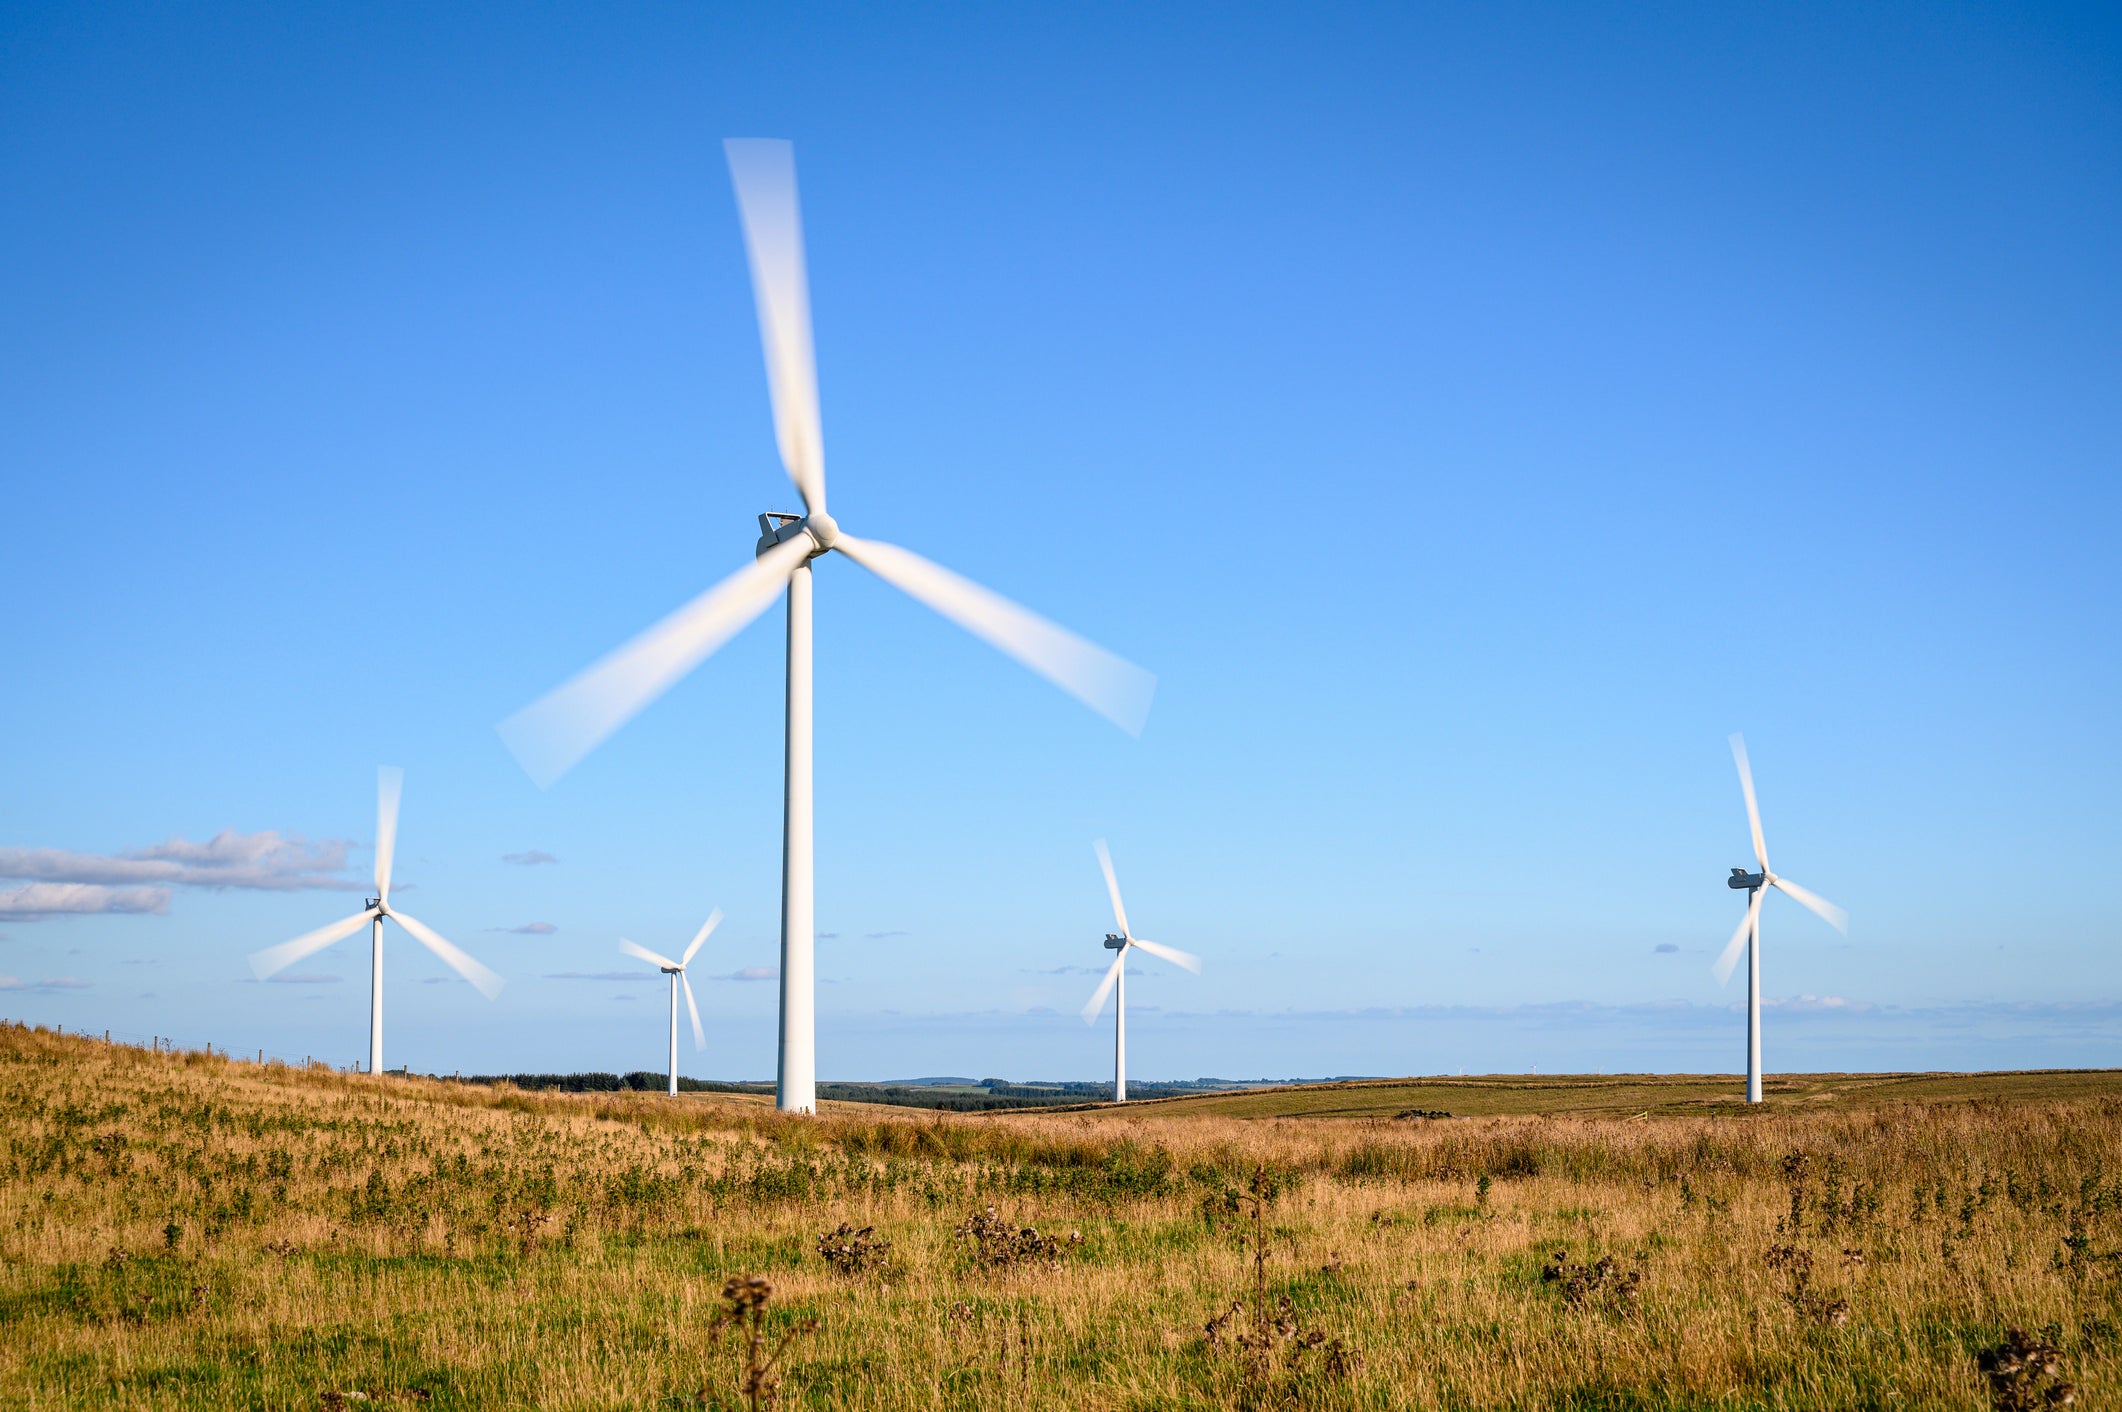 Polling shows that 77 per cent of people say they would support a new onshore wind farm being built in their area